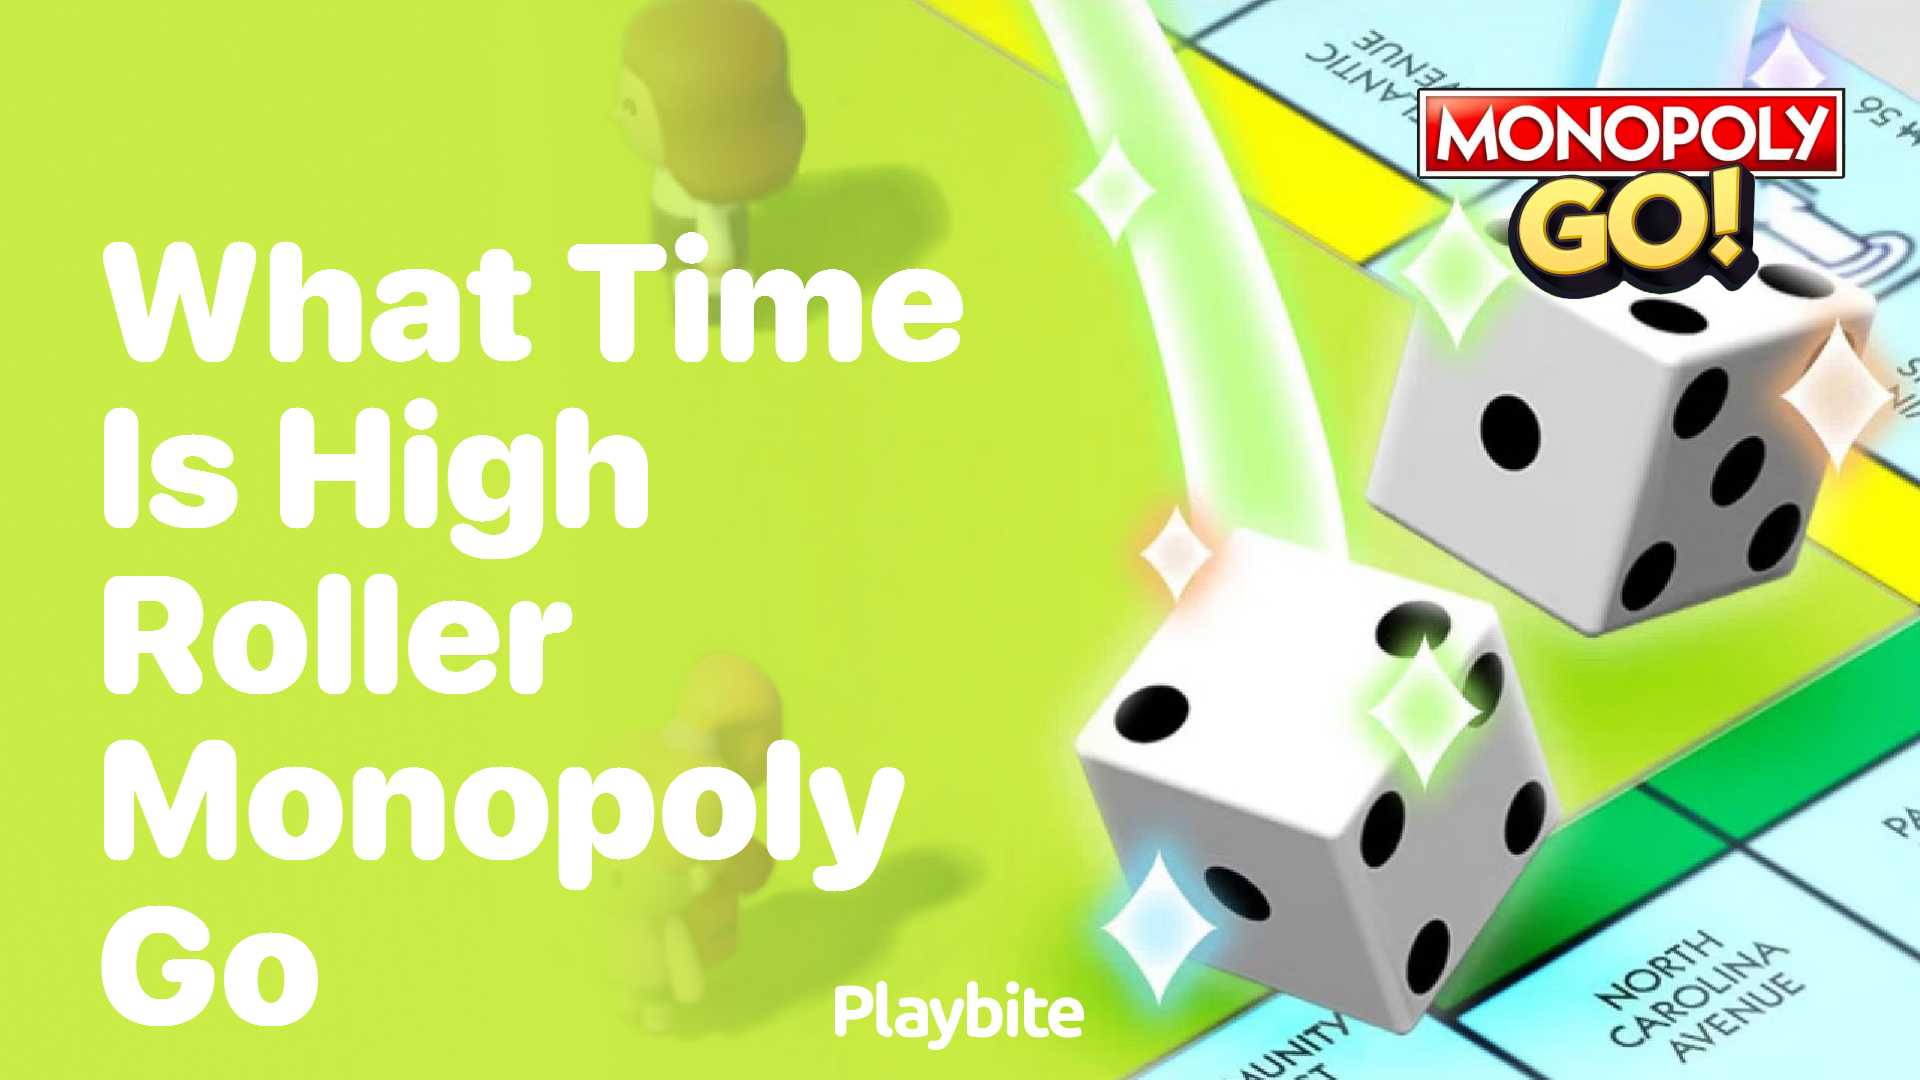 What Time is High Roller Monopoly Go?